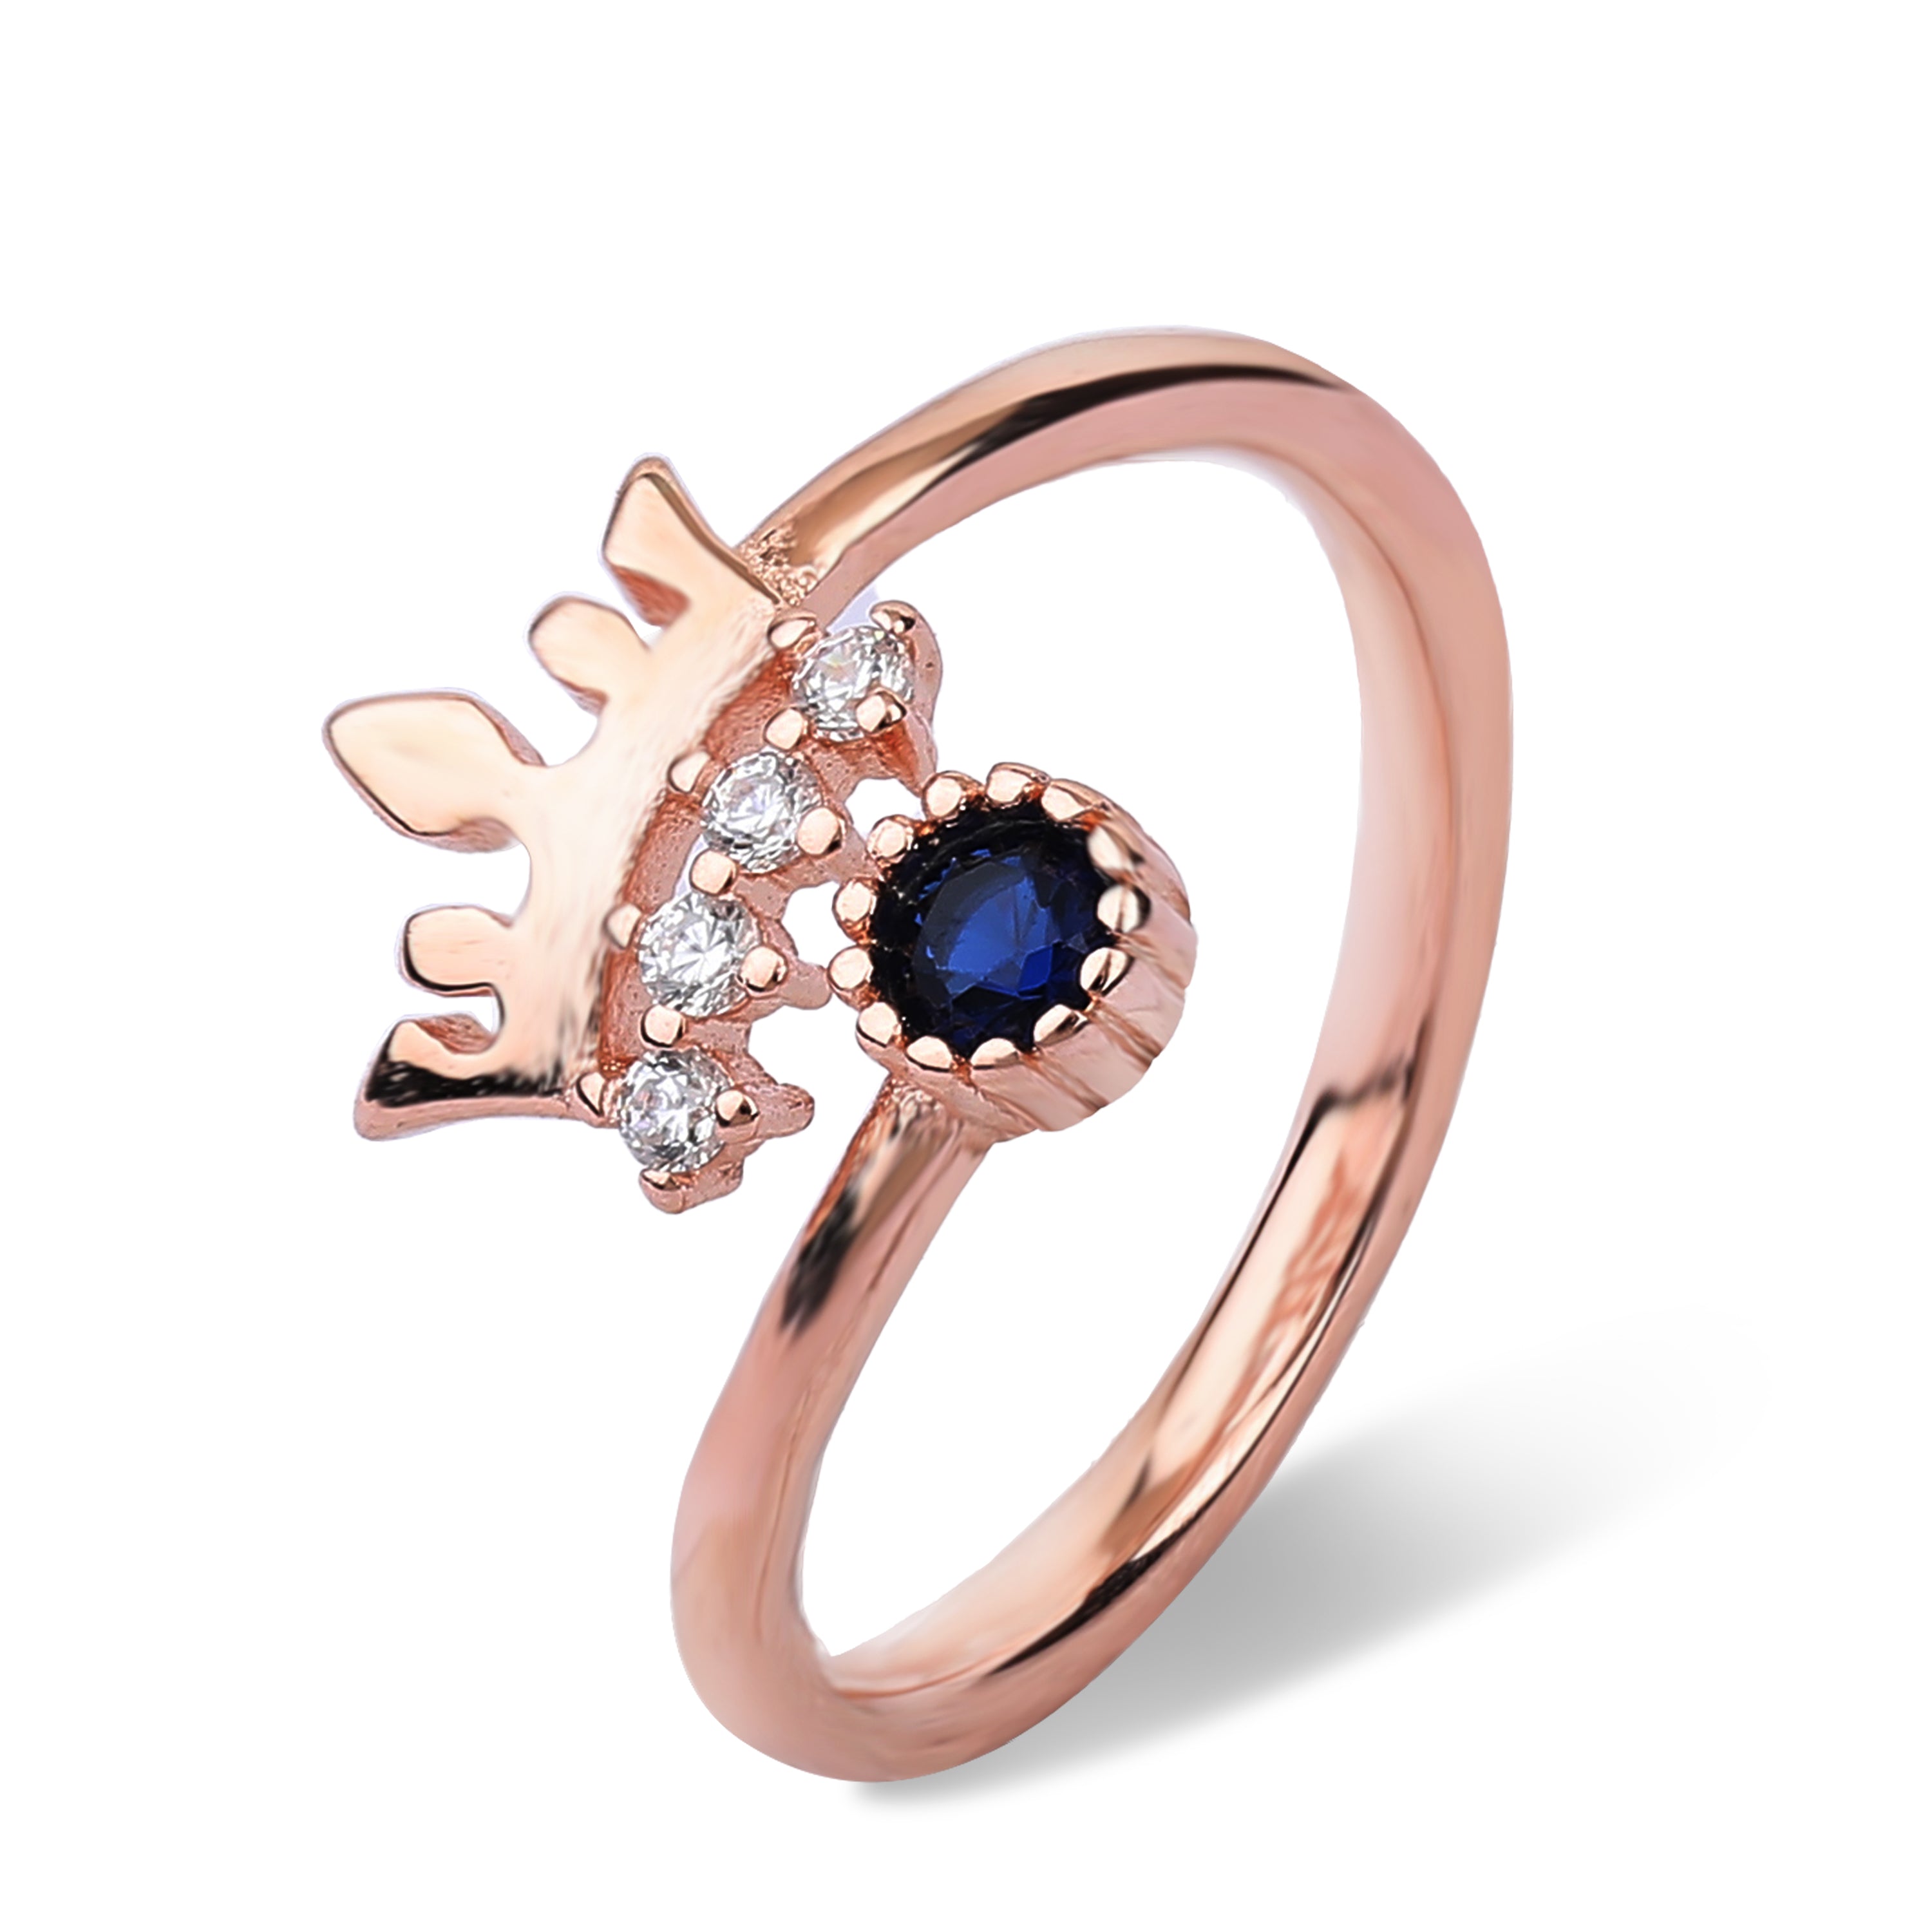 Royal crown ring rose gold with adjustable size